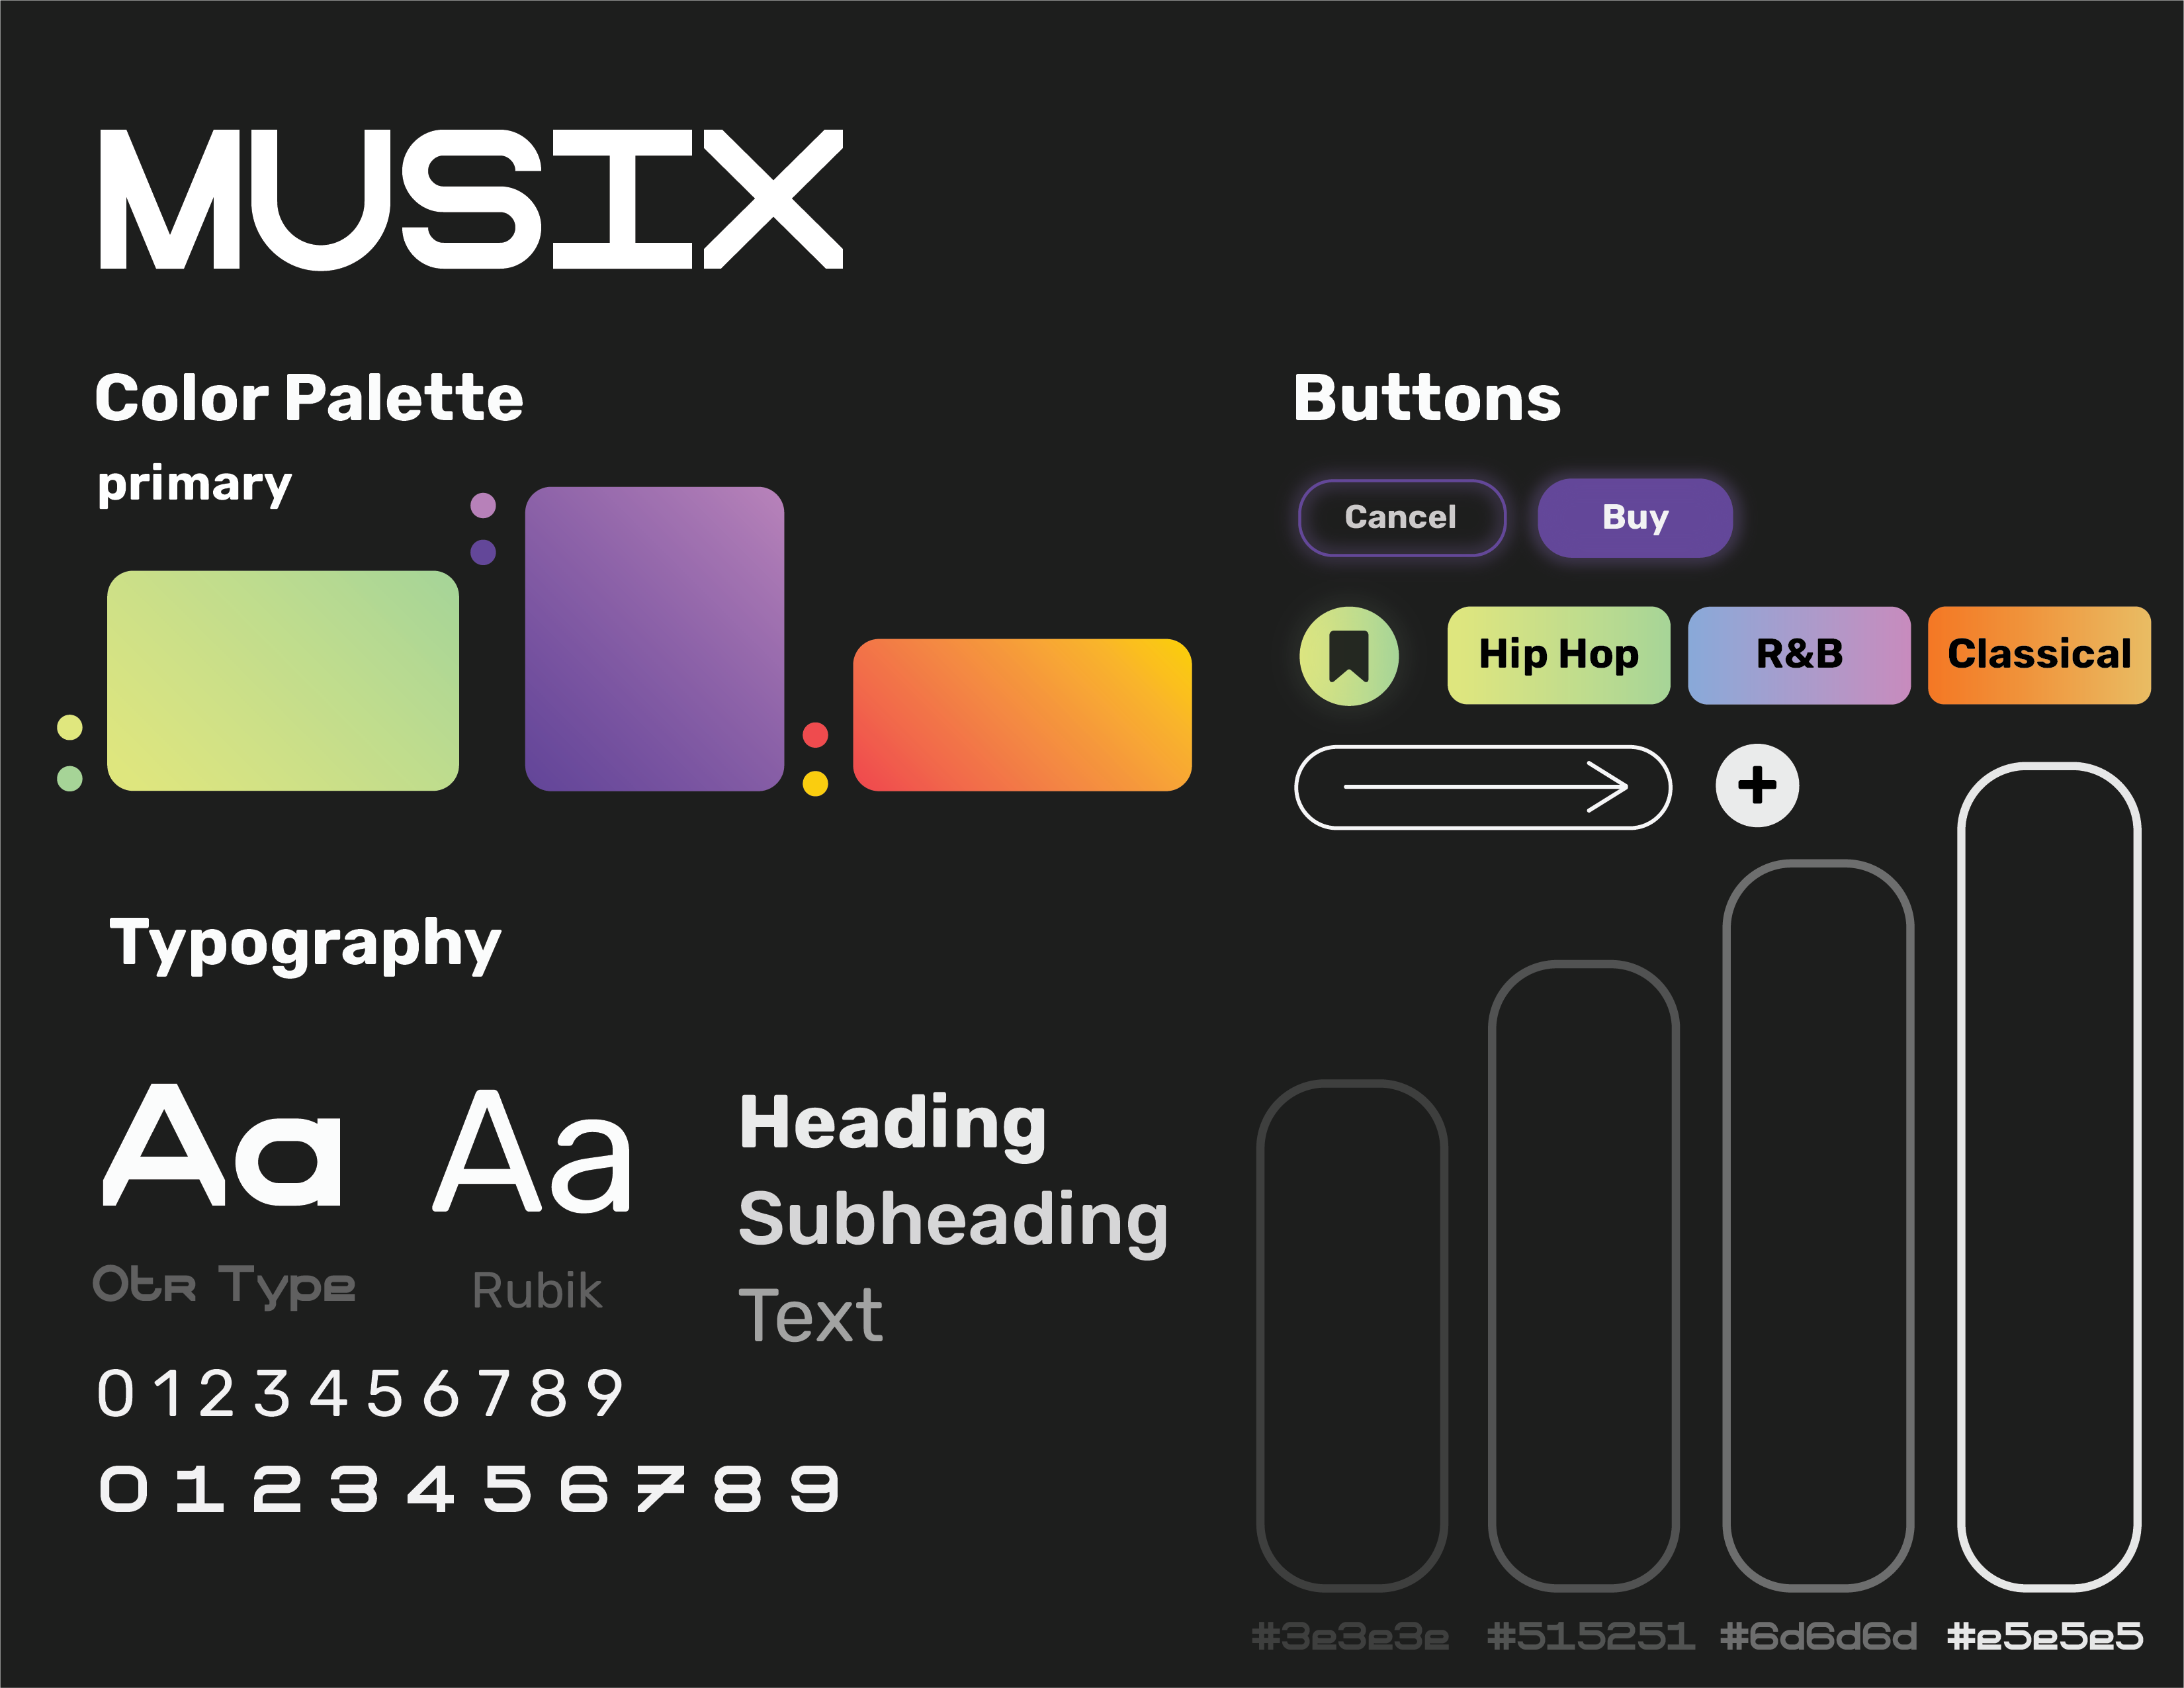 Style guide including typography, icons, and colors for Musix app